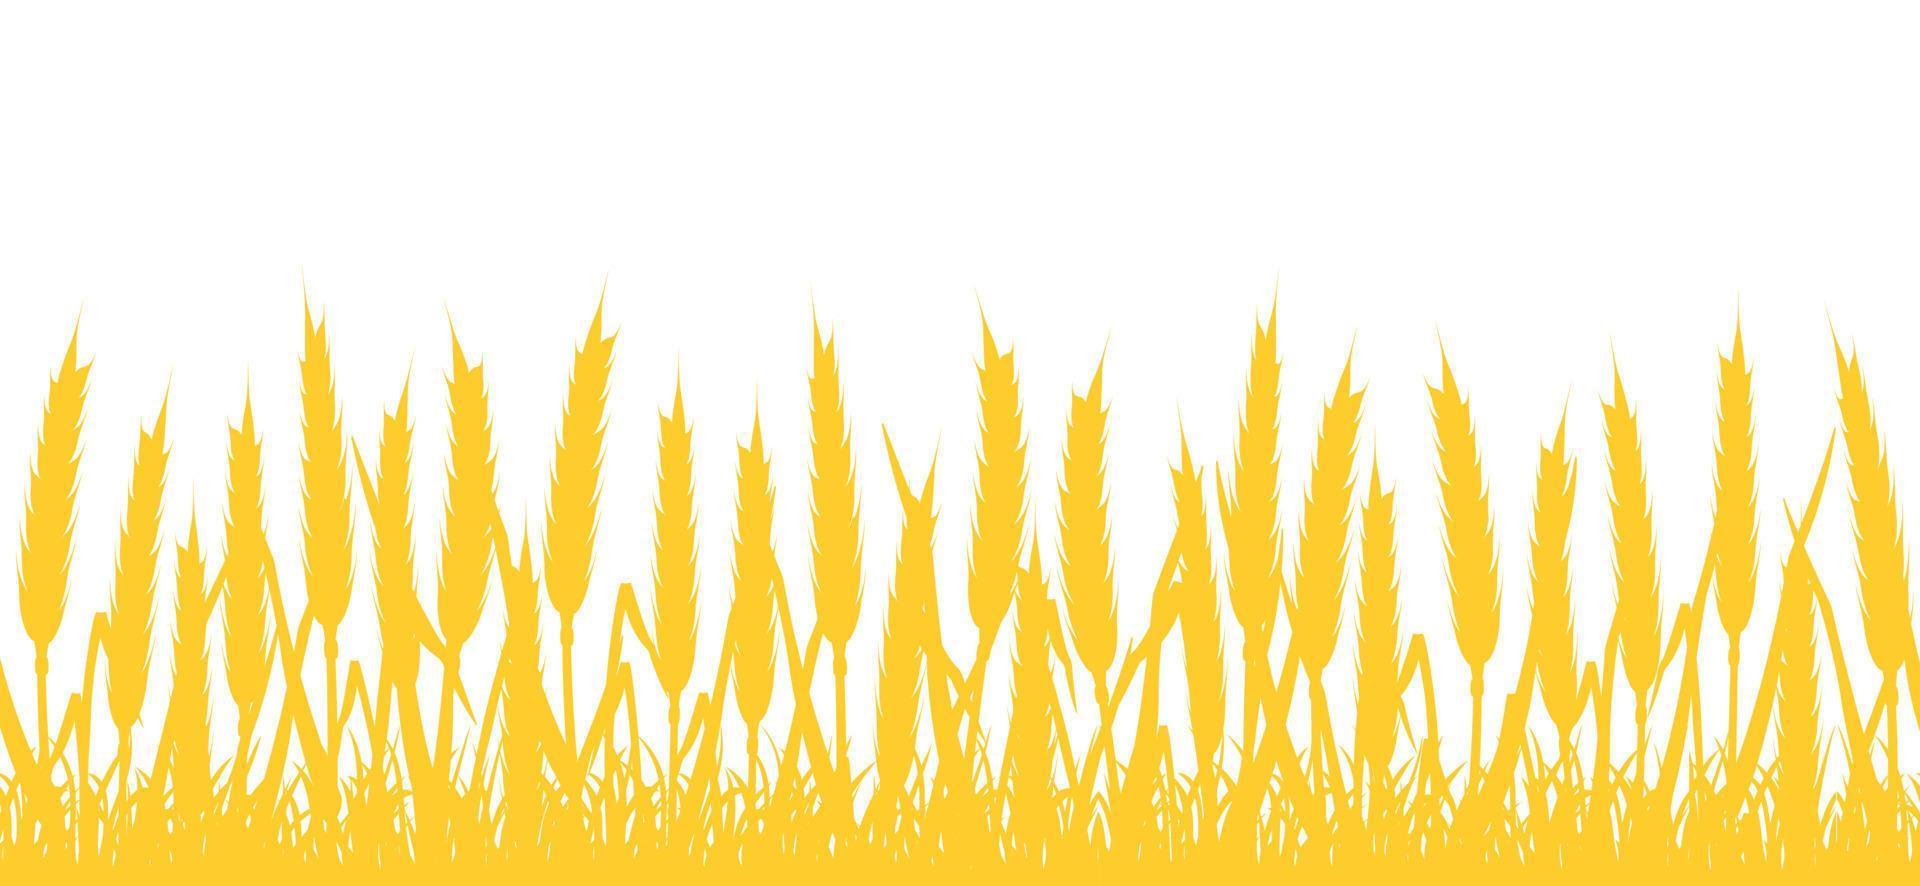 Wheat field silhouette. Seamless border with yellow ears. vector